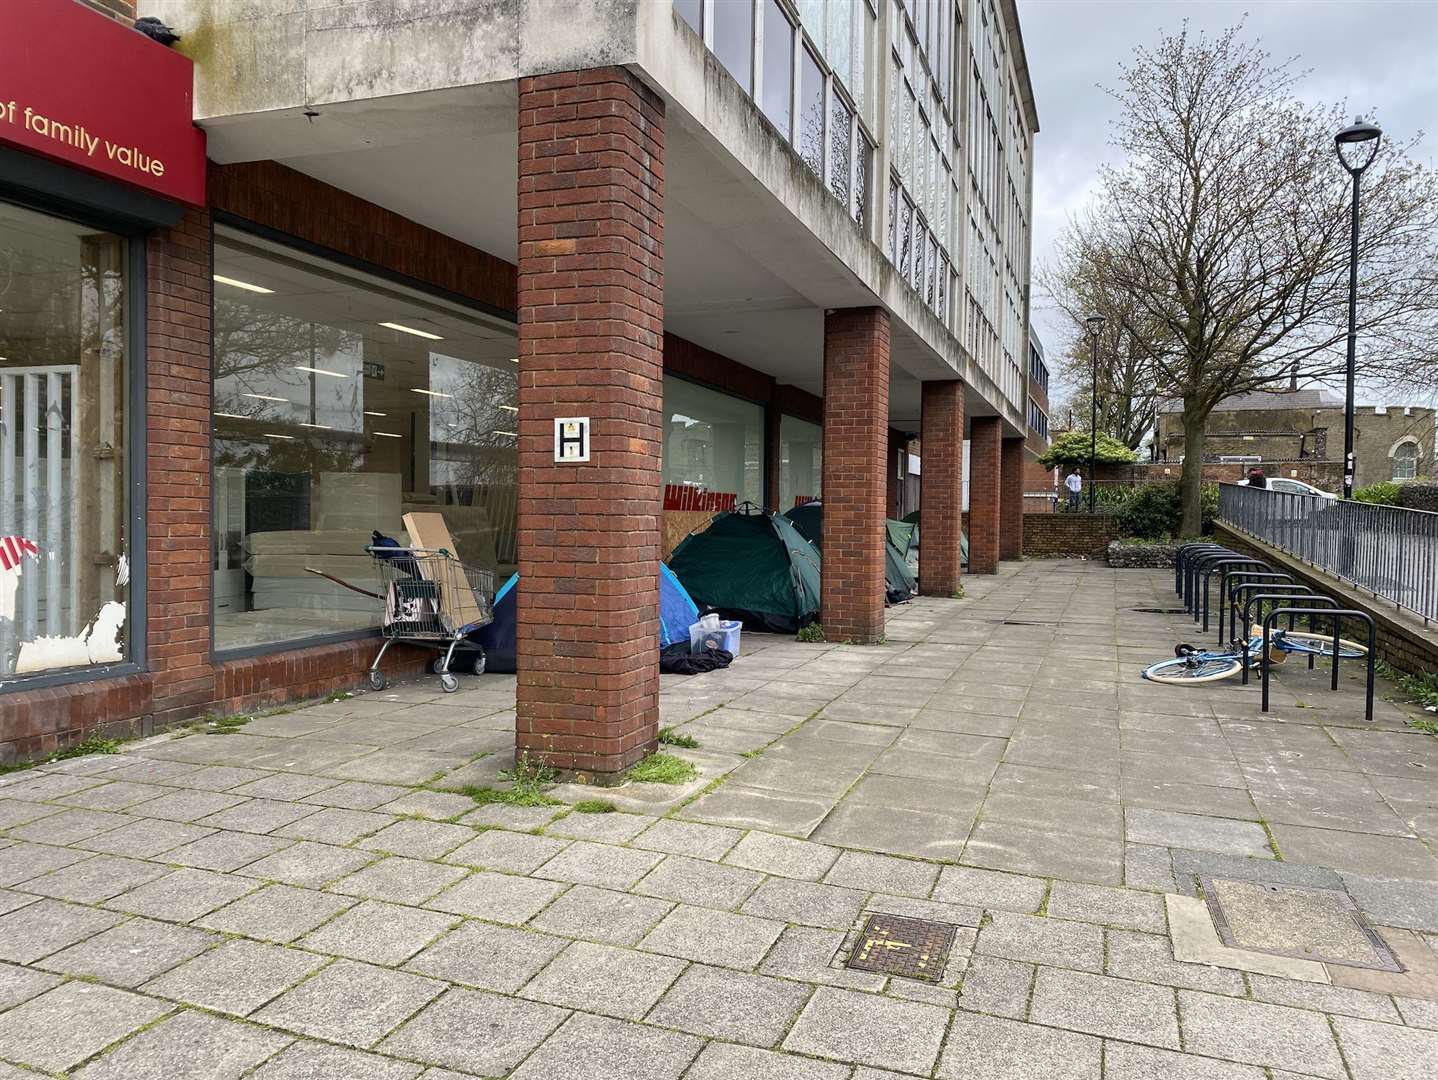 Rough sleepers often congregate in public spaces for shelter, such as the former Wilko building in Canterbury